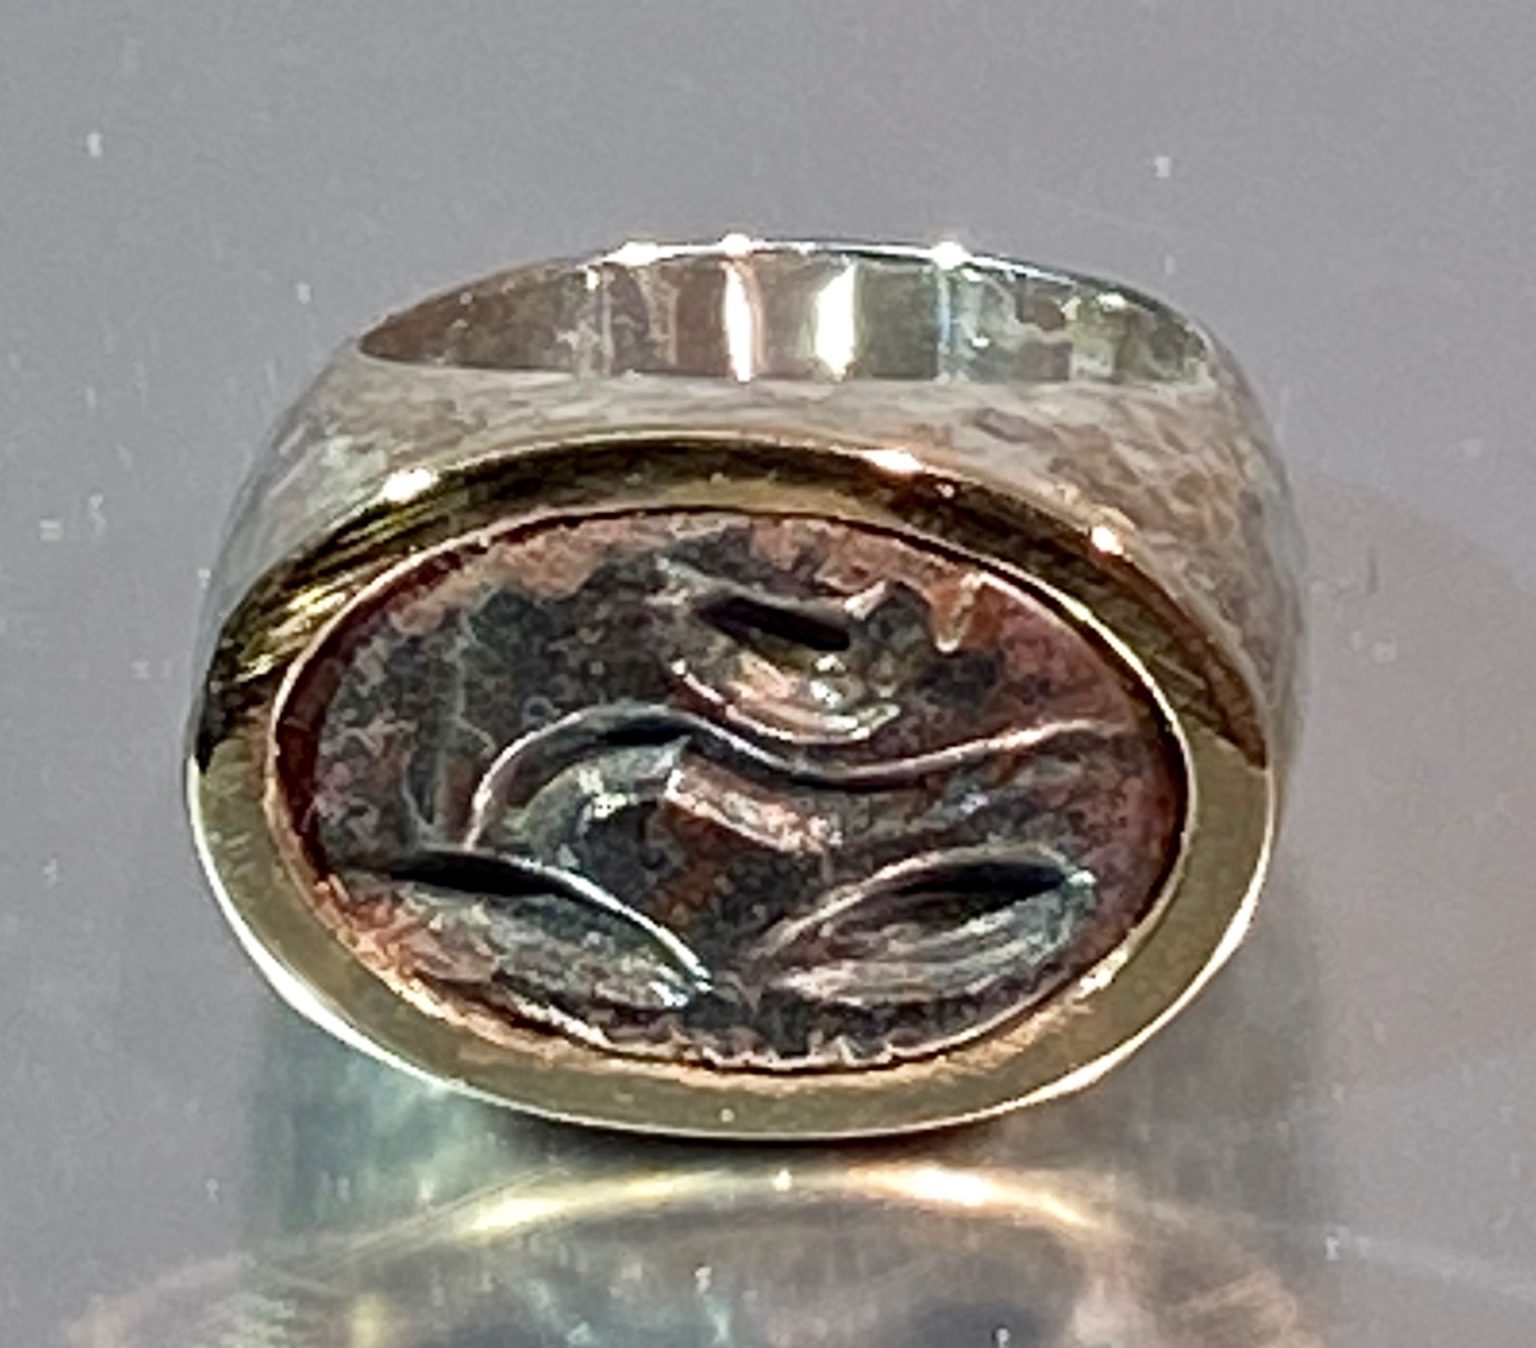 Finger ring with an engraved floral bezel